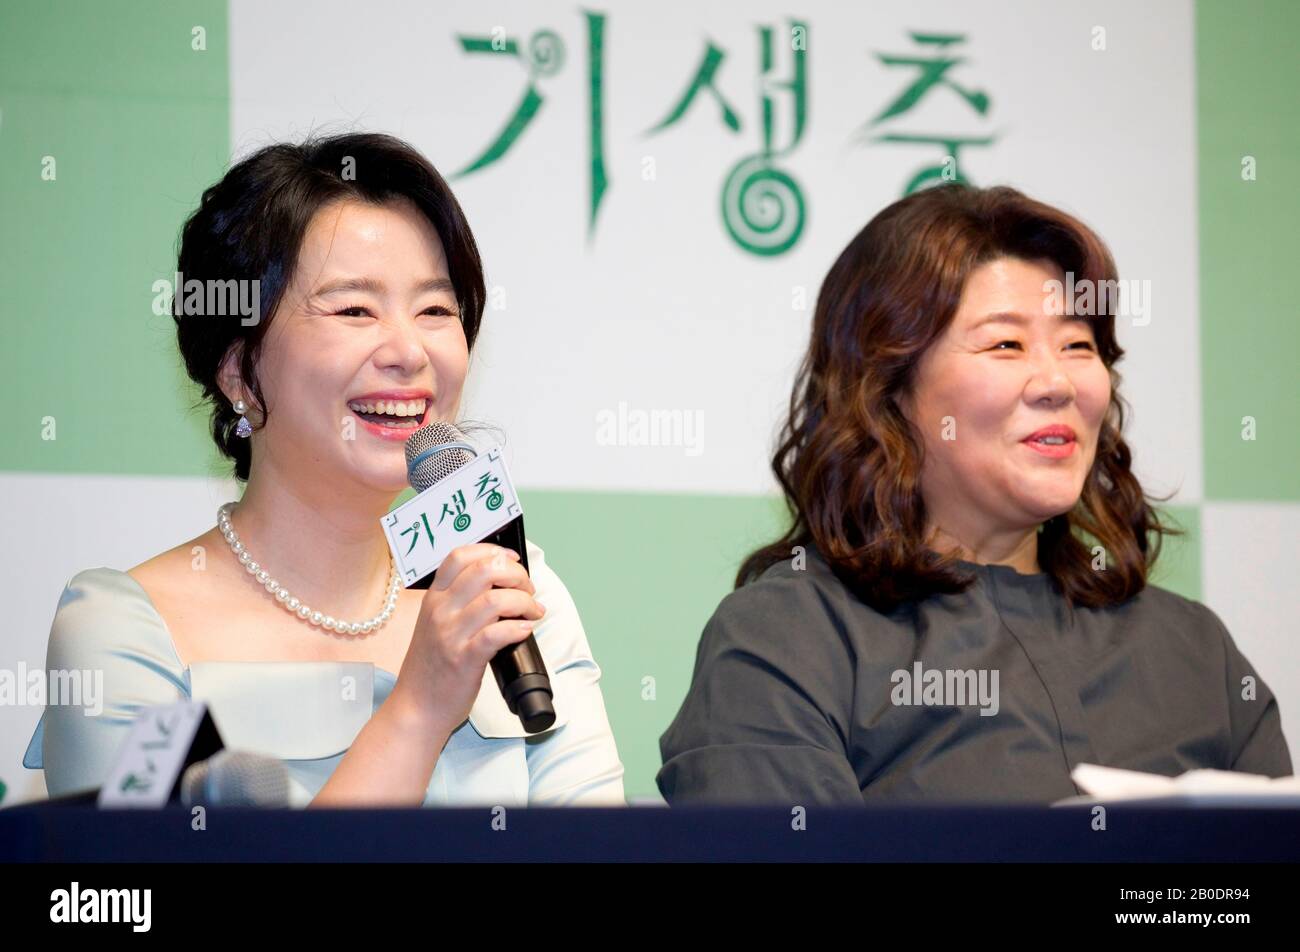 Jang Hye-Jin and Lee Jung-Eun, Feb 19, 2020 : South Korean actresses Jang Hye-Jin (L) and Lee Jung-Eun, cast members of the Oscar-winning film 'Parasite', attend a press conference in Seoul, South Korea. The Korean black comedy thriller won four Oscar titles at the Academy Awards on Feb 9, 2020, becoming the first non-English language film to win the Oscars Best Picture in its 92-year history. Credit: Lee Jae-Won/AFLO/Alamy Live News Stock Photo